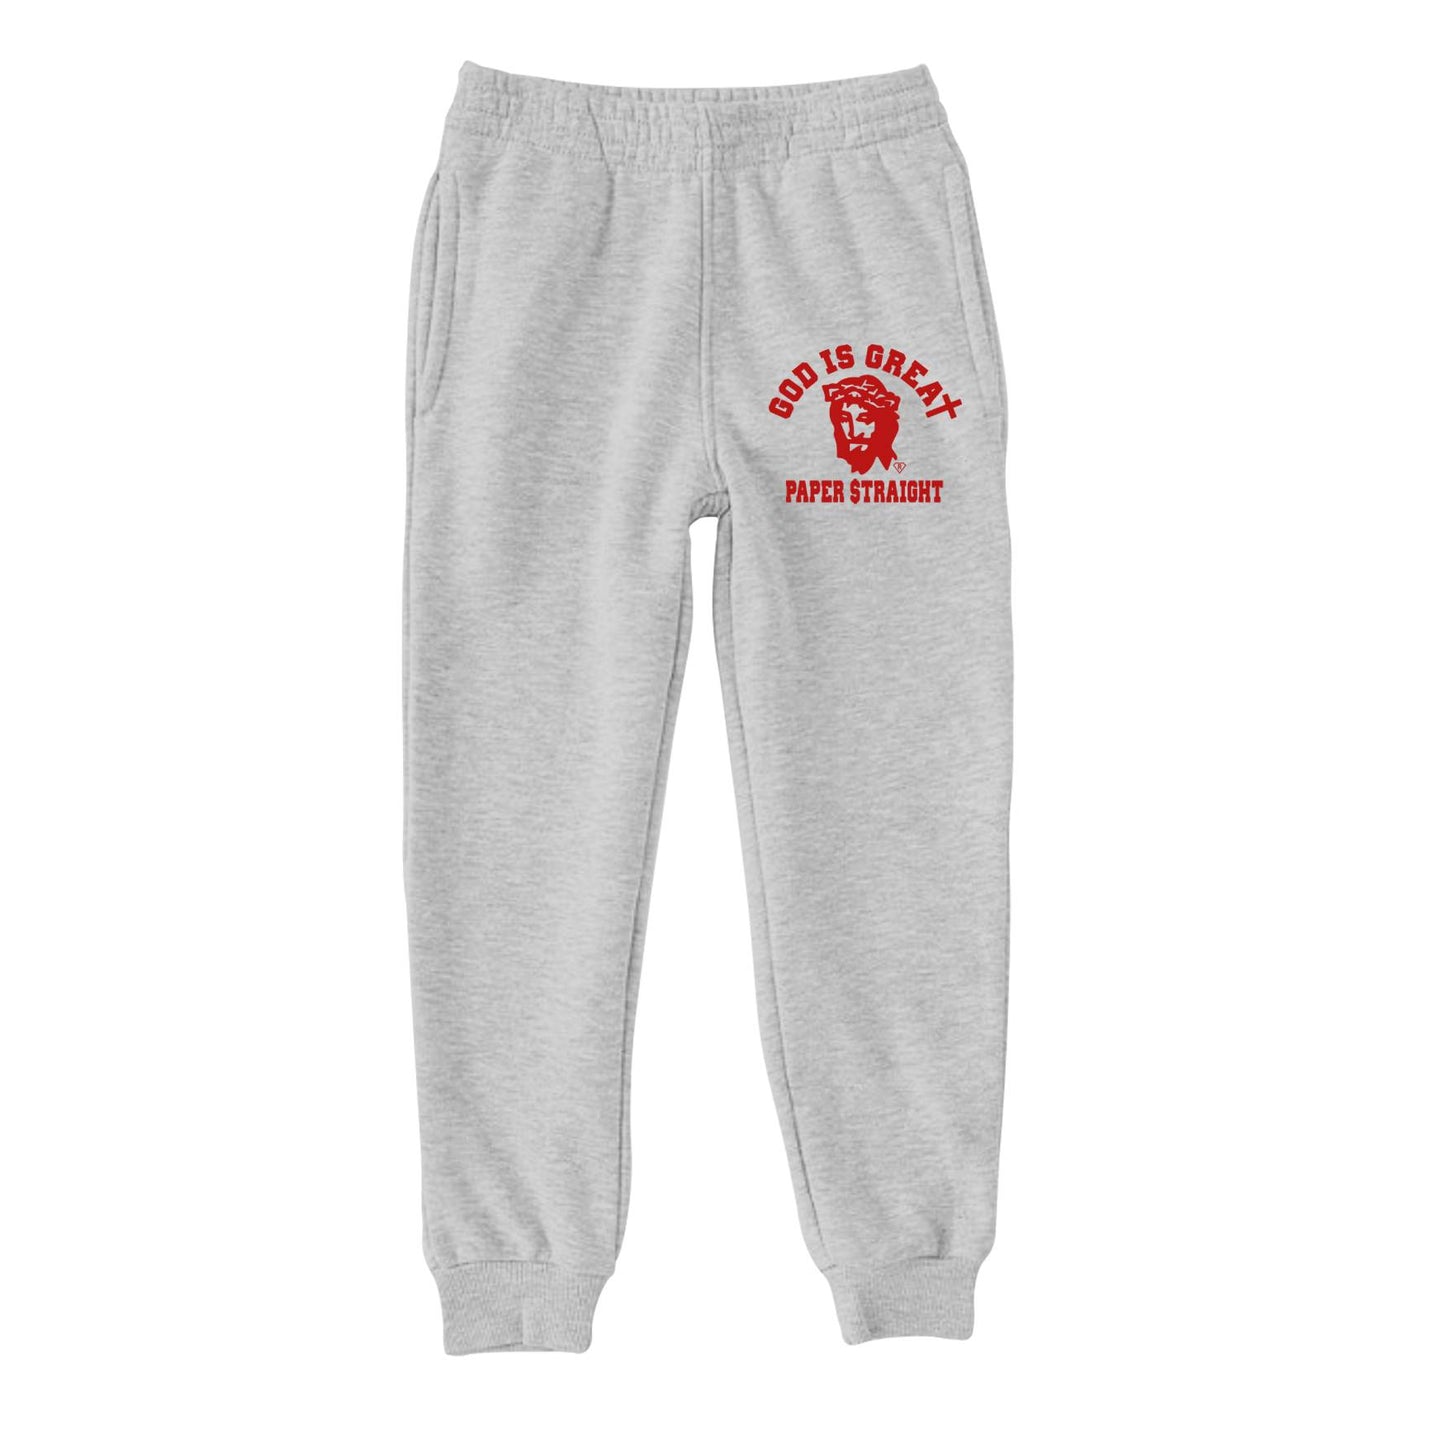 CLASSIC GIGPS JOGGERS - GREY & RED